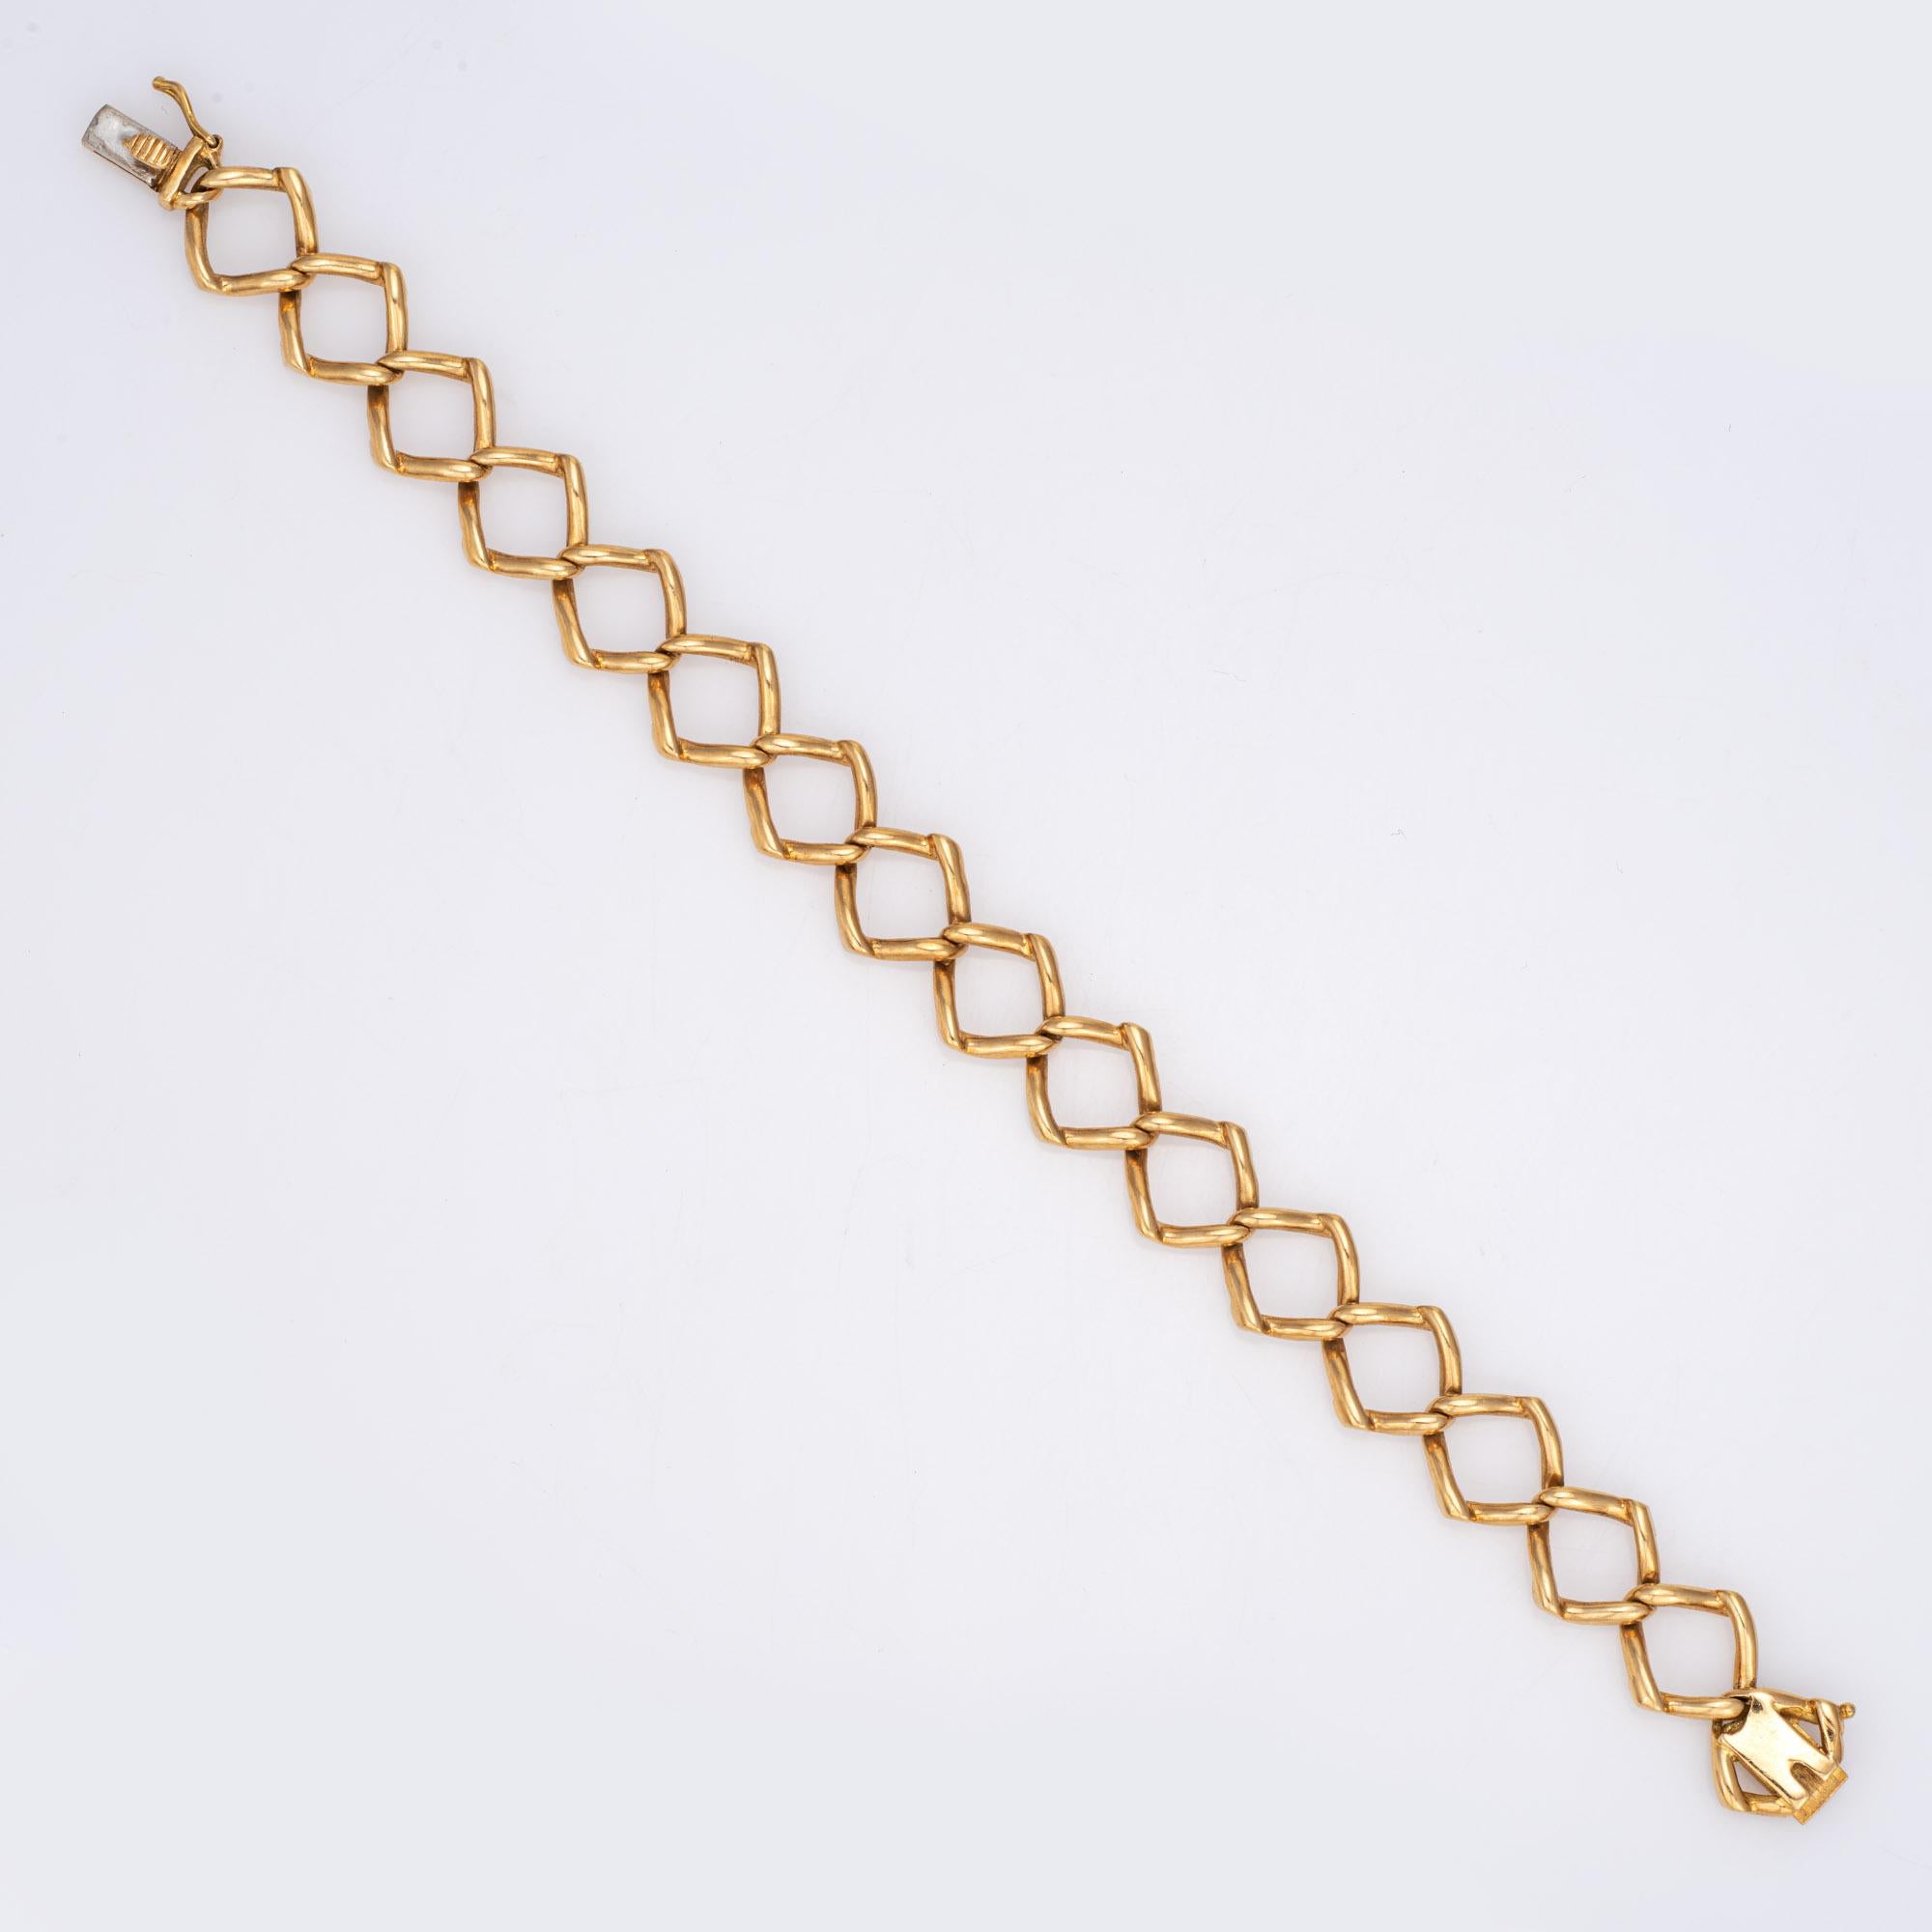 Rare vintage Tiffany & Co bracelet designed by Paloma Picasso, crafted in 18 karat yellow gold (circa 1981).  

Dating to 1981 the bold open link bracelet is designed by Paloma Picasso for Tiffany & Co, the year after she started her design work at